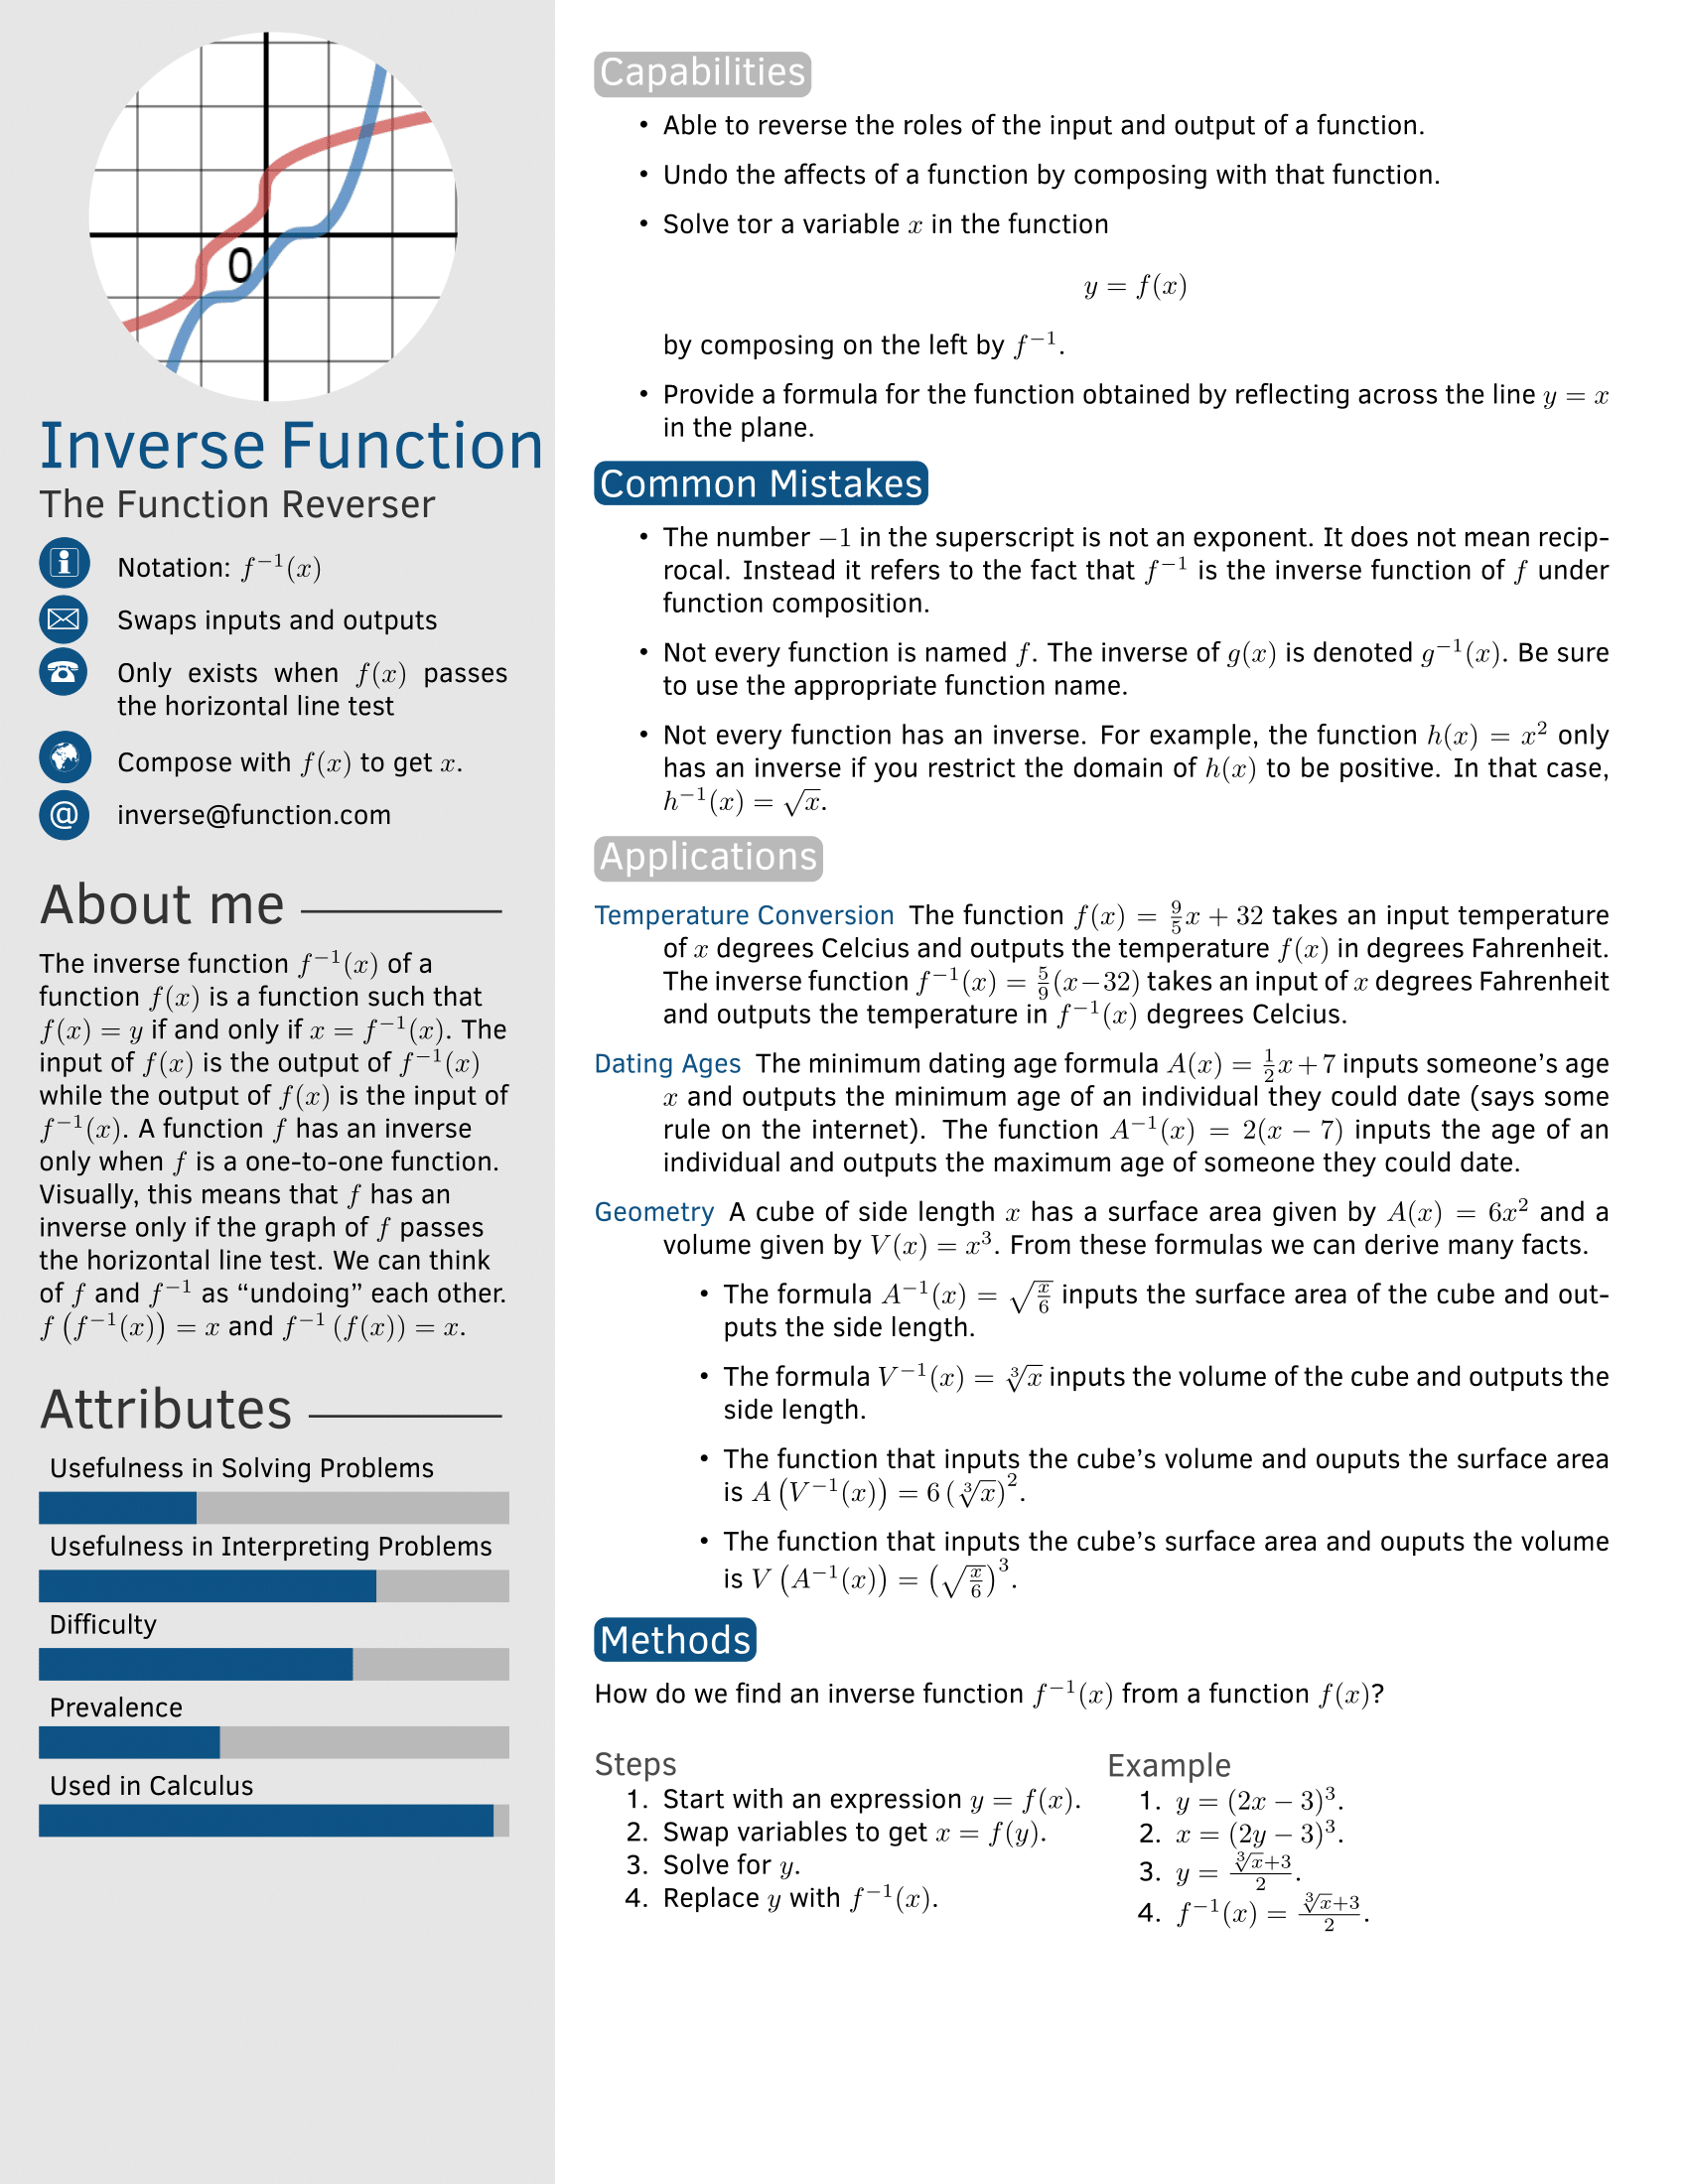 A resume for inverse functions